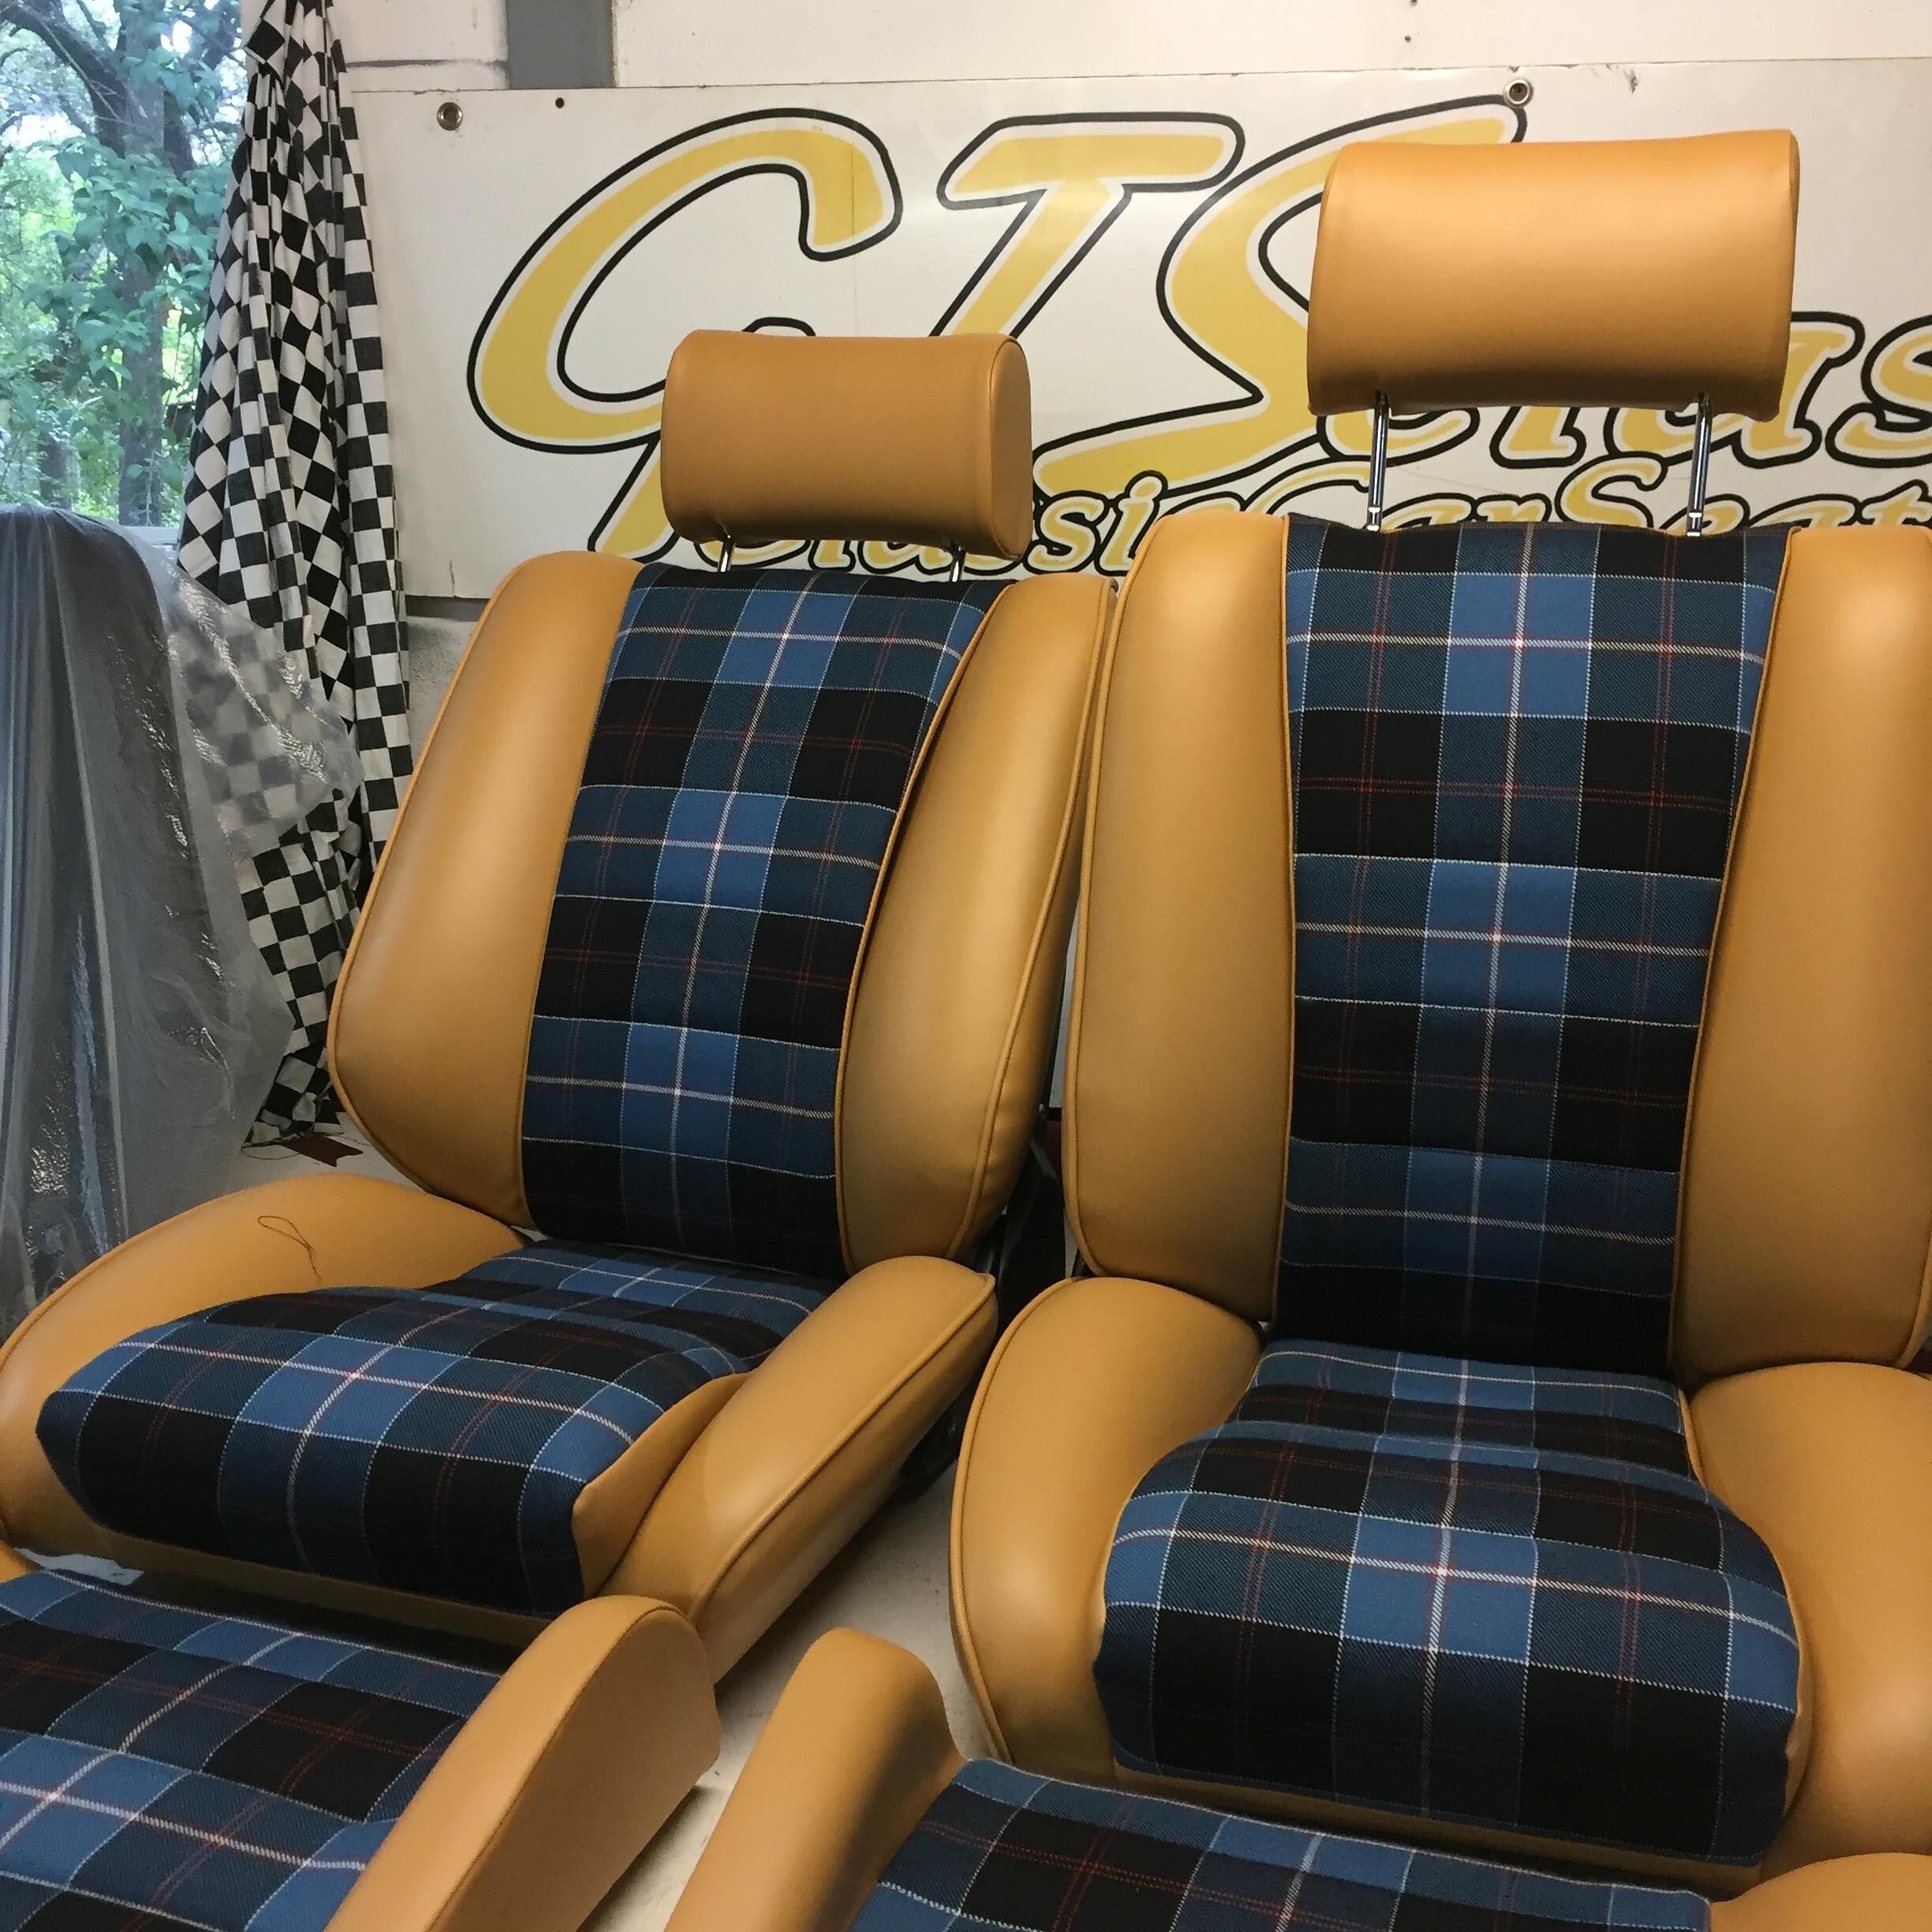 Automotive Seats  Replacement, Racing, Sport, Classic, Aftermarket —